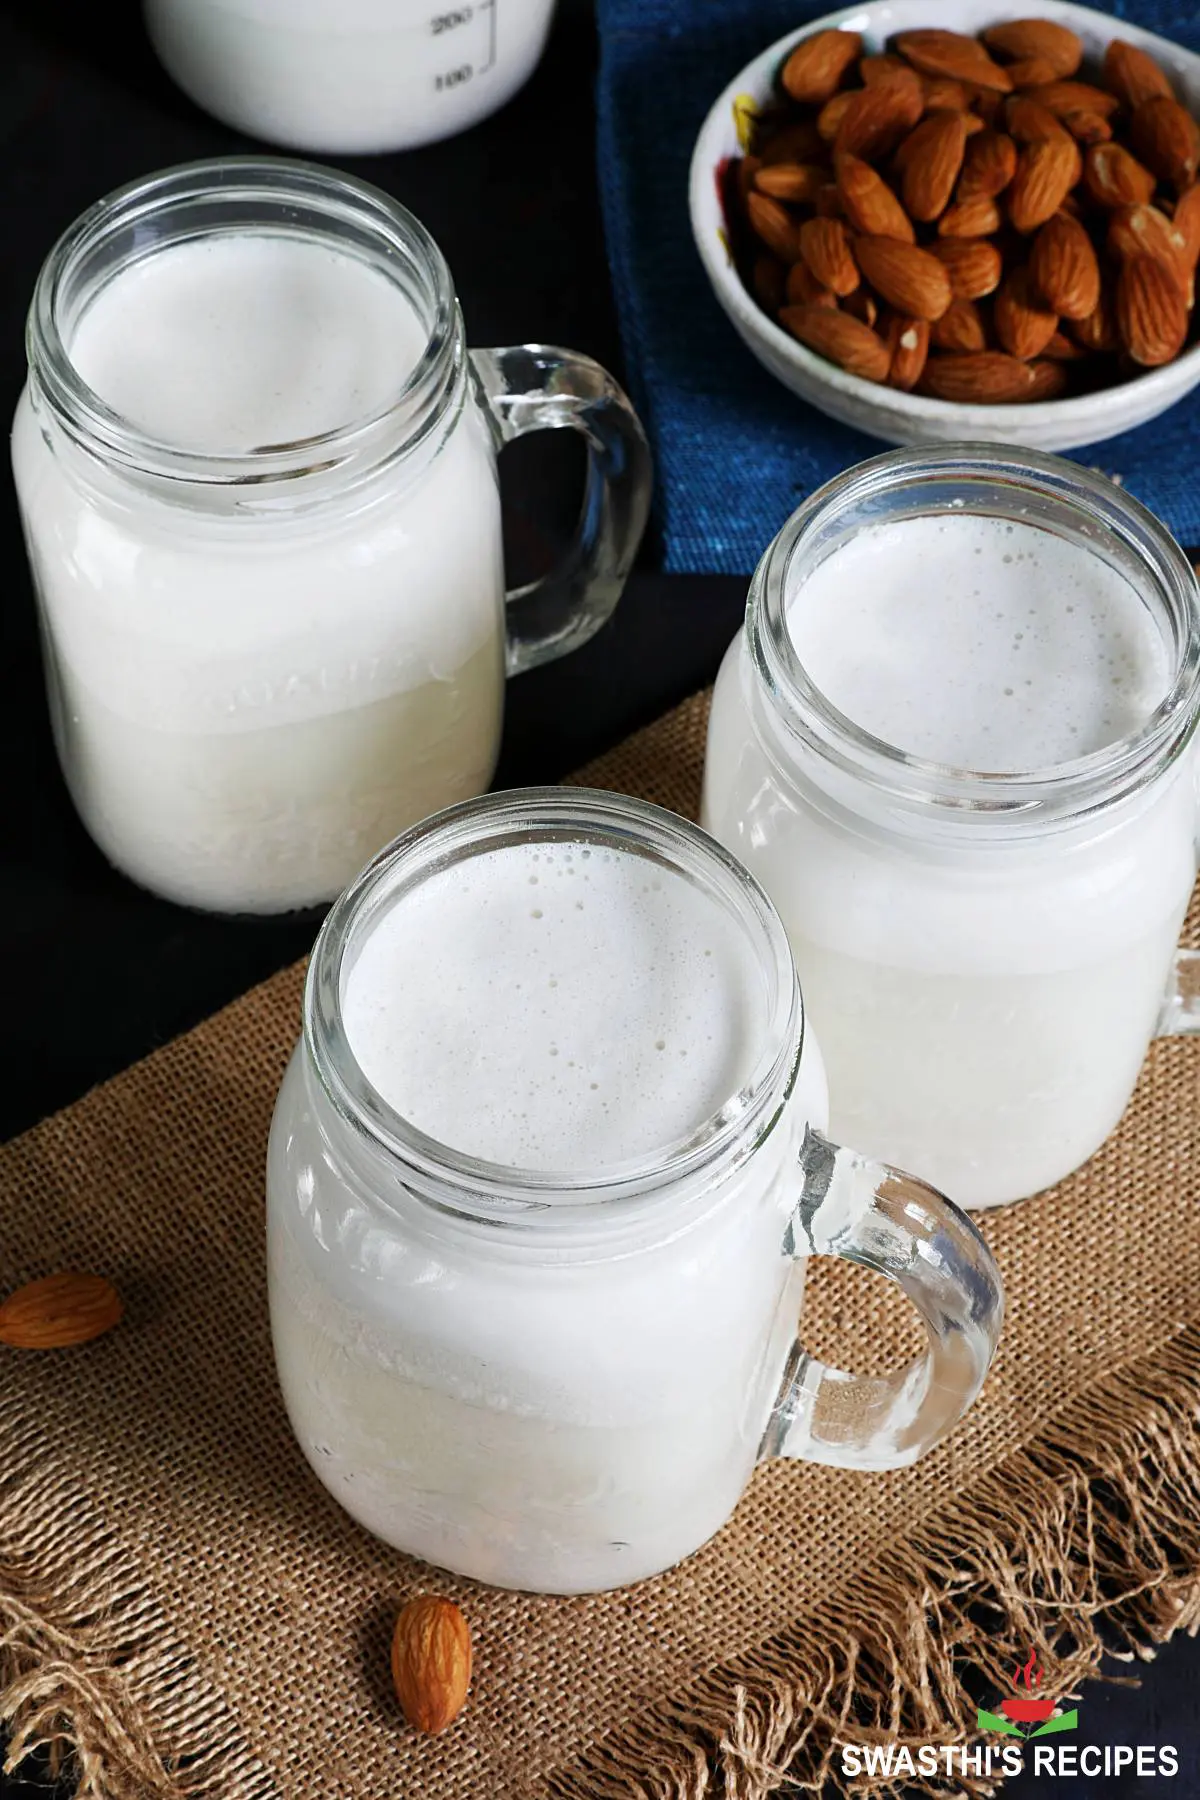 How to Make Your Own Nut Milk At Home